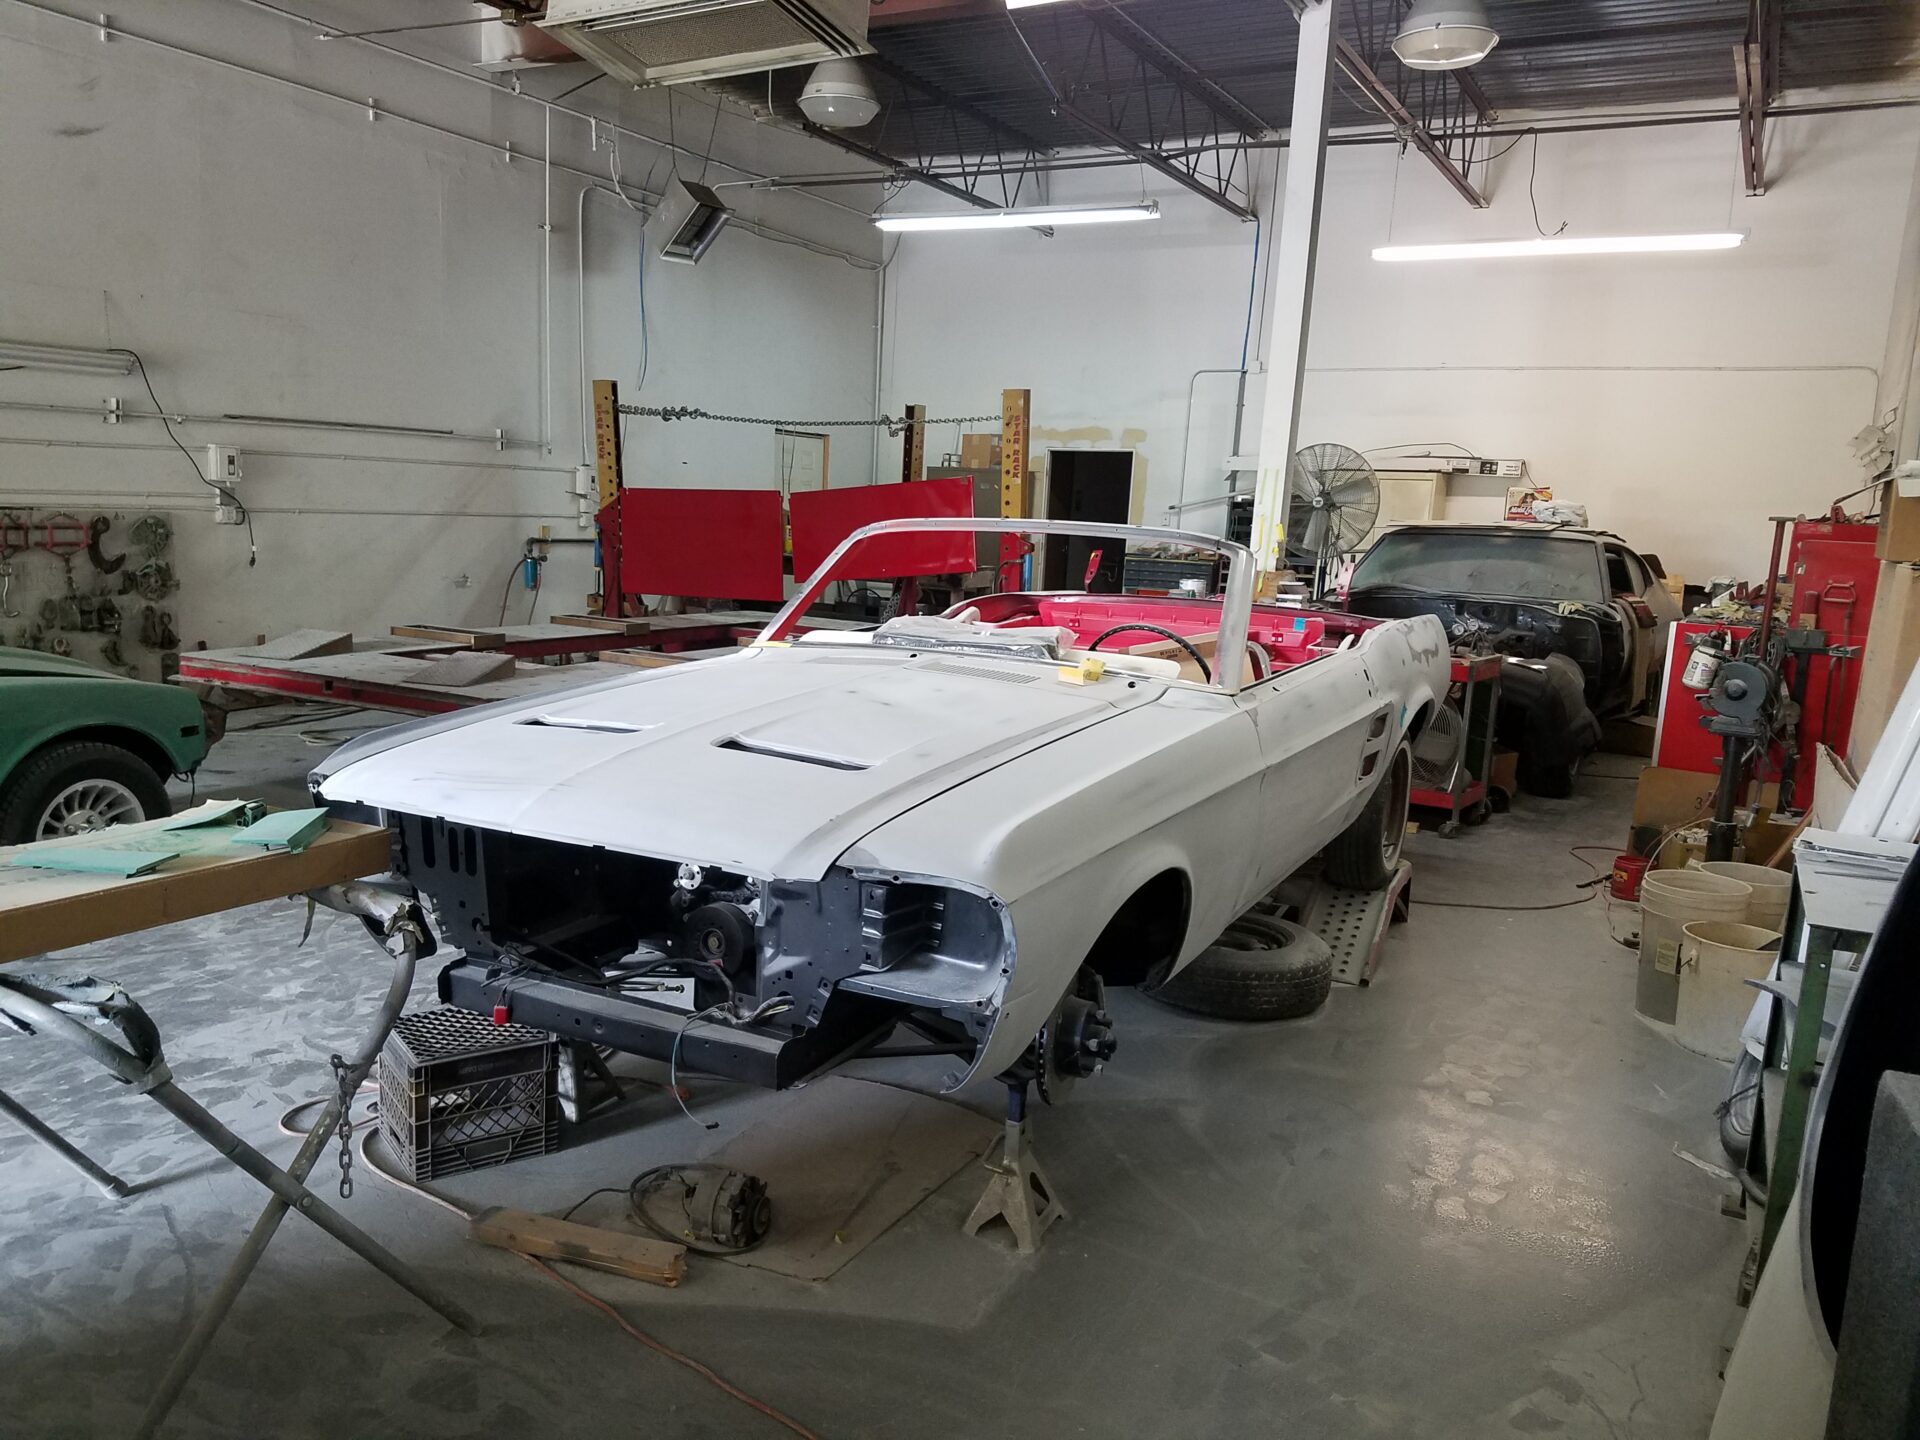 A 1967 Ford Mustang Convertible with ongoing repairs